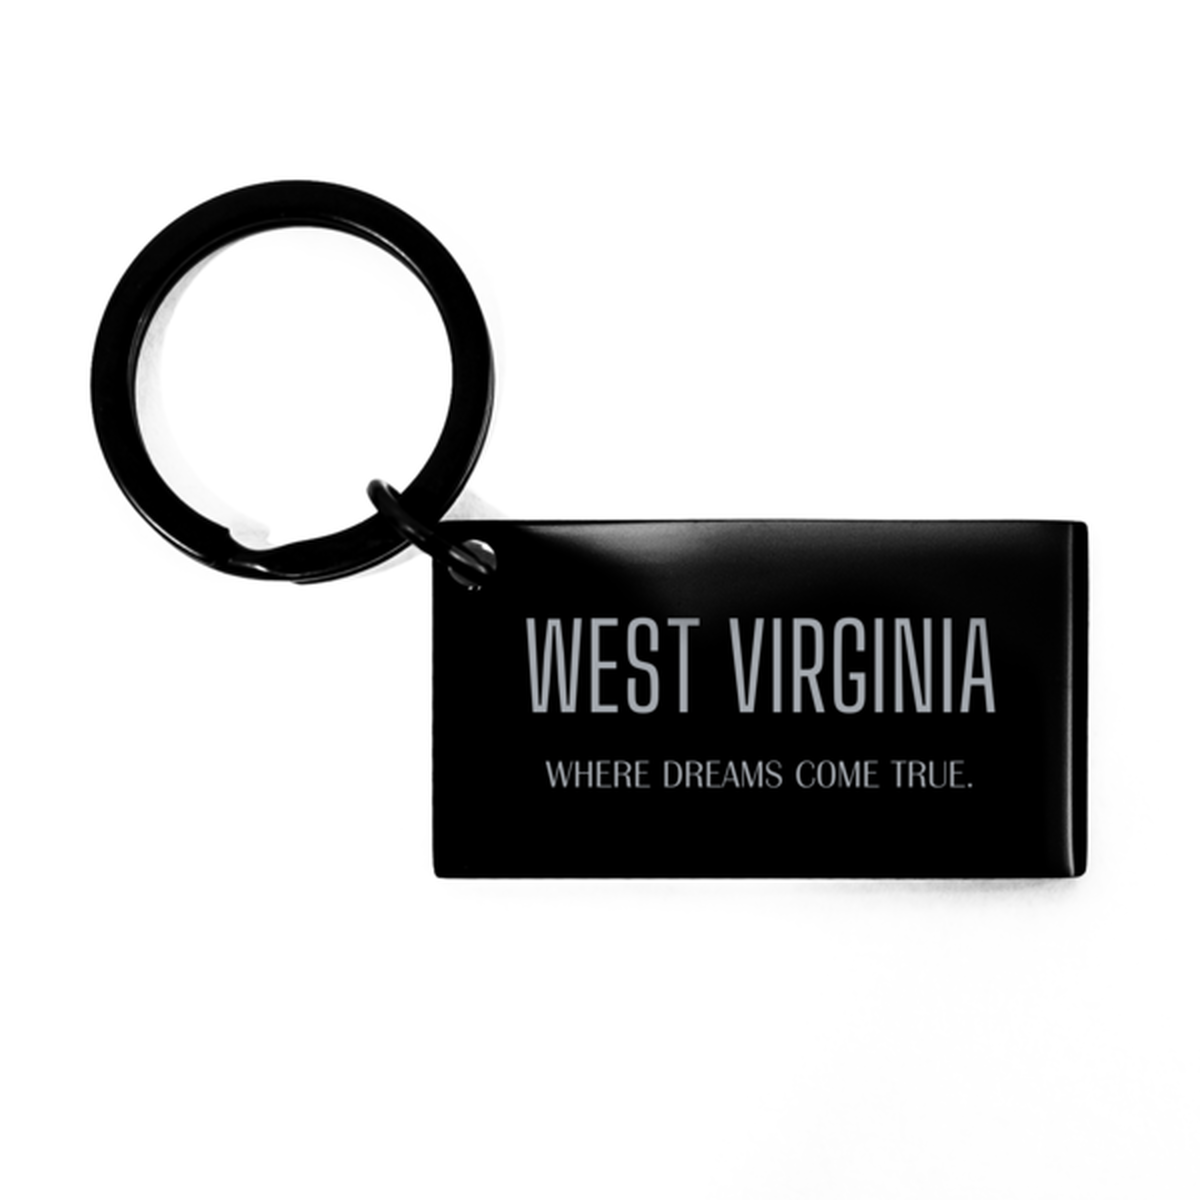 Love West Virginia State Keychain, West Virginia Where dreams come true, Birthday Inspirational Gifts For West Virginia Men, Women, Friends